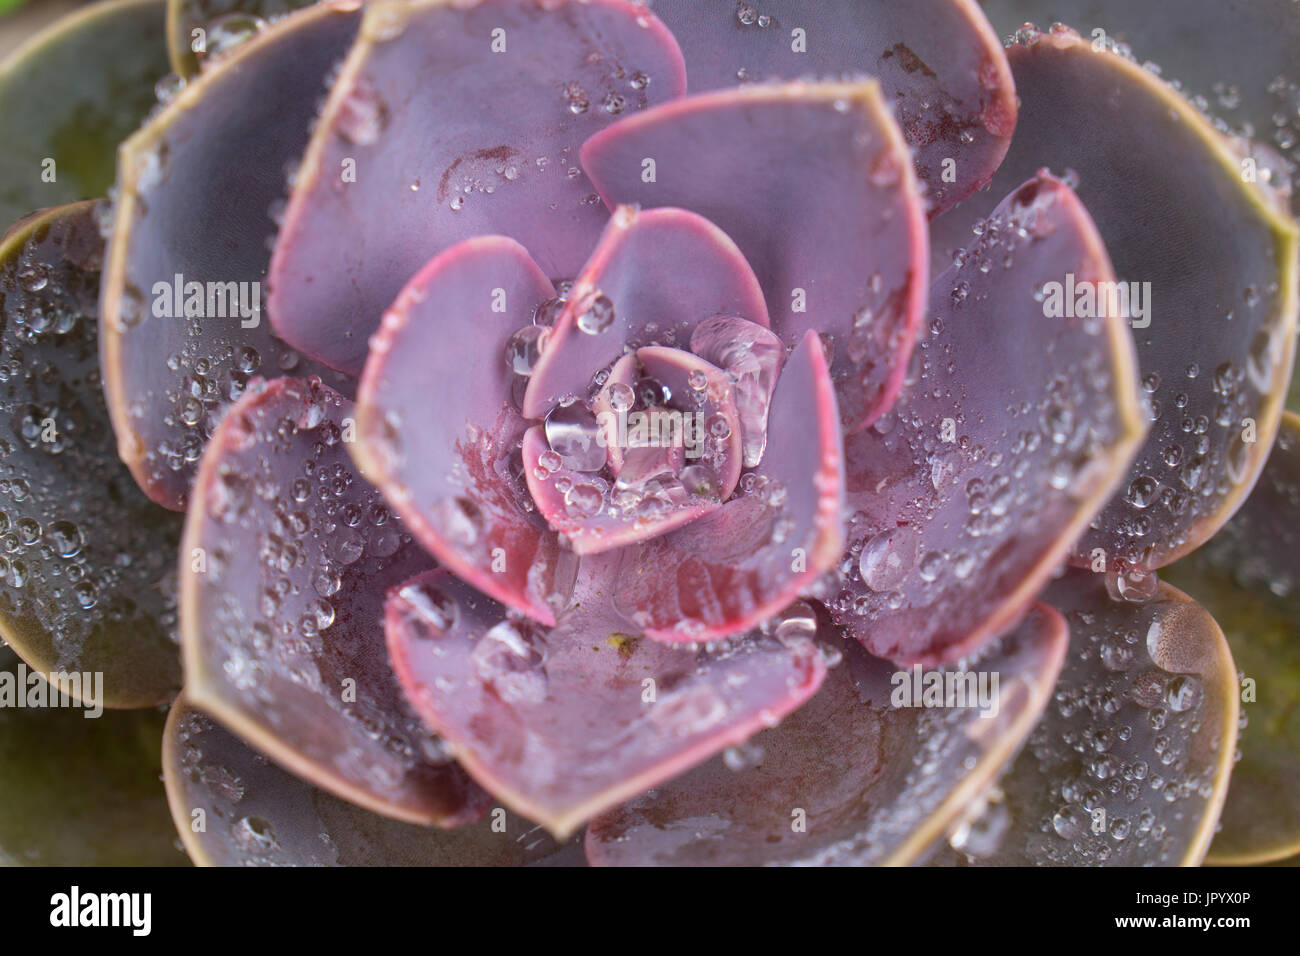 Echeveria Perle Von Nurnberg, 'Pearl of Nurnberg', with early morning dew. Detail of the cactus acuminate leaves and centre with dew droplets. Stock Photo